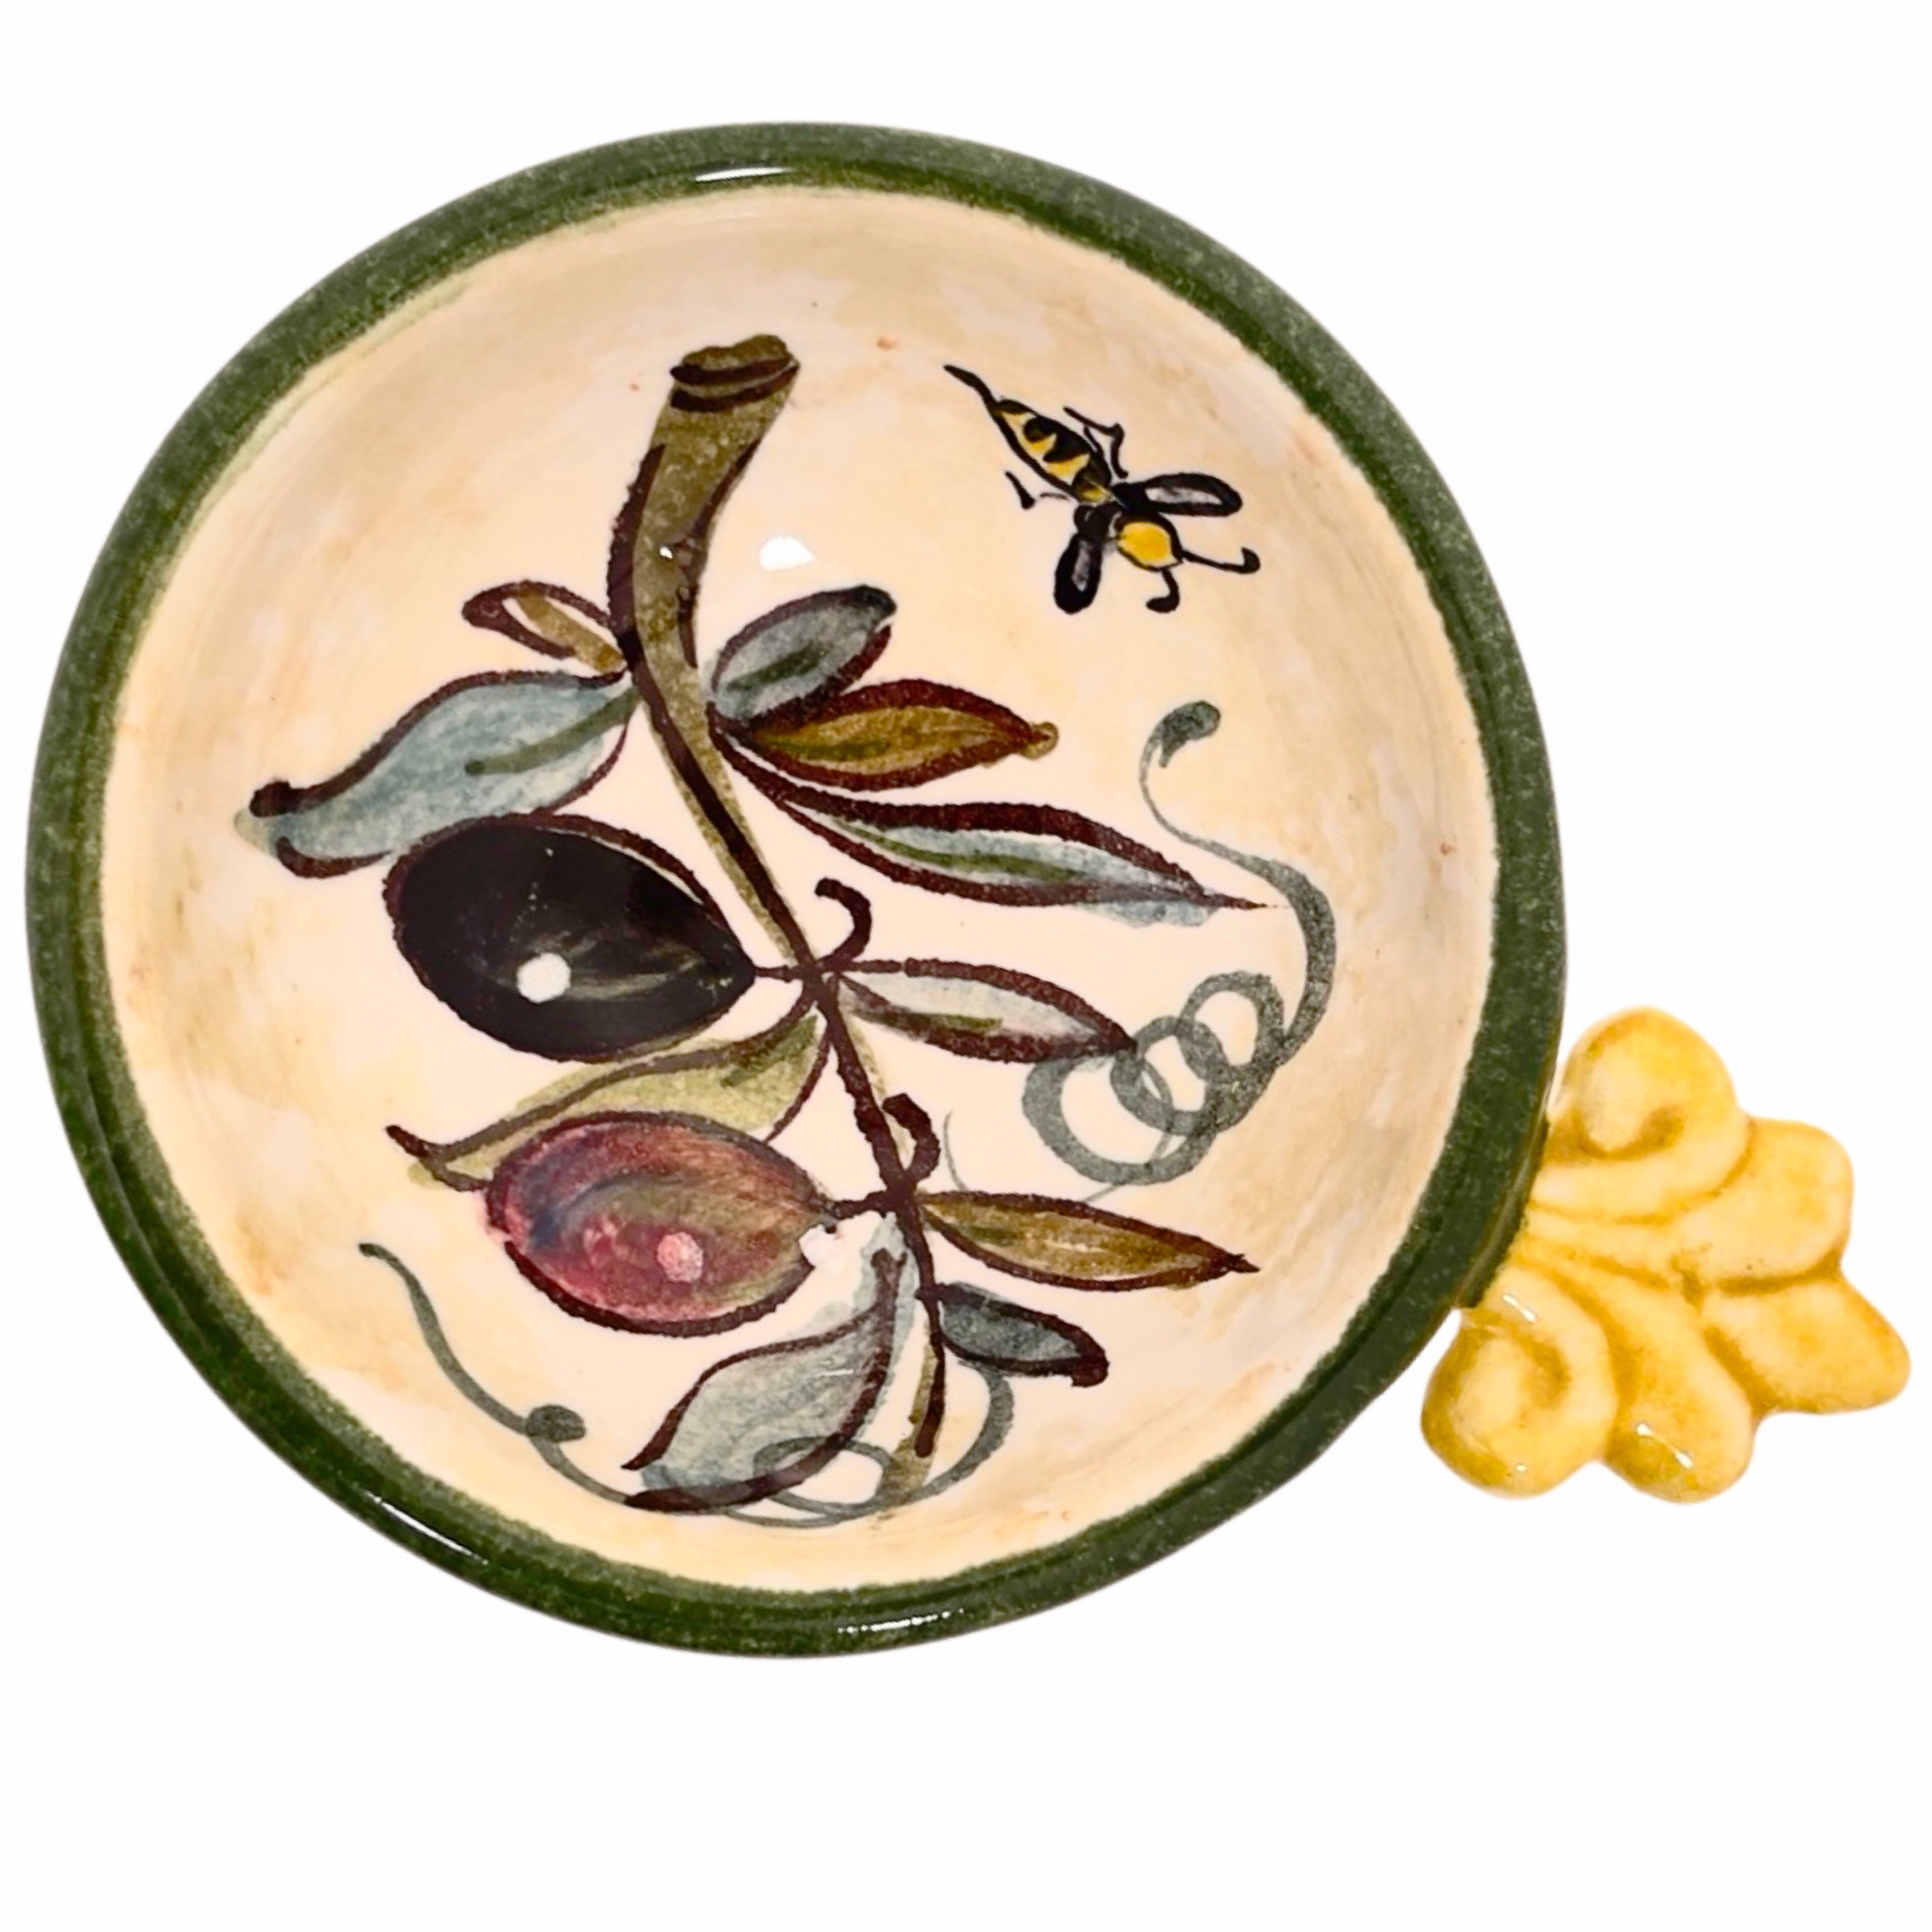 Olive Condiment Bowl, ceramics, pottery, italian design, majolica, handmade, handcrafted, handpainted, home decor, kitchen art, home goods, deruta, majolica, Artisan, treasures, traditional art, modern art, gift ideas, style, SF, shop small business, artists, shop online, landmark store, legacy, one of a kind, limited edition, gift guide, gift shop, retail shop, decorations, shopping, italy, home staging, home decorating, home interiors